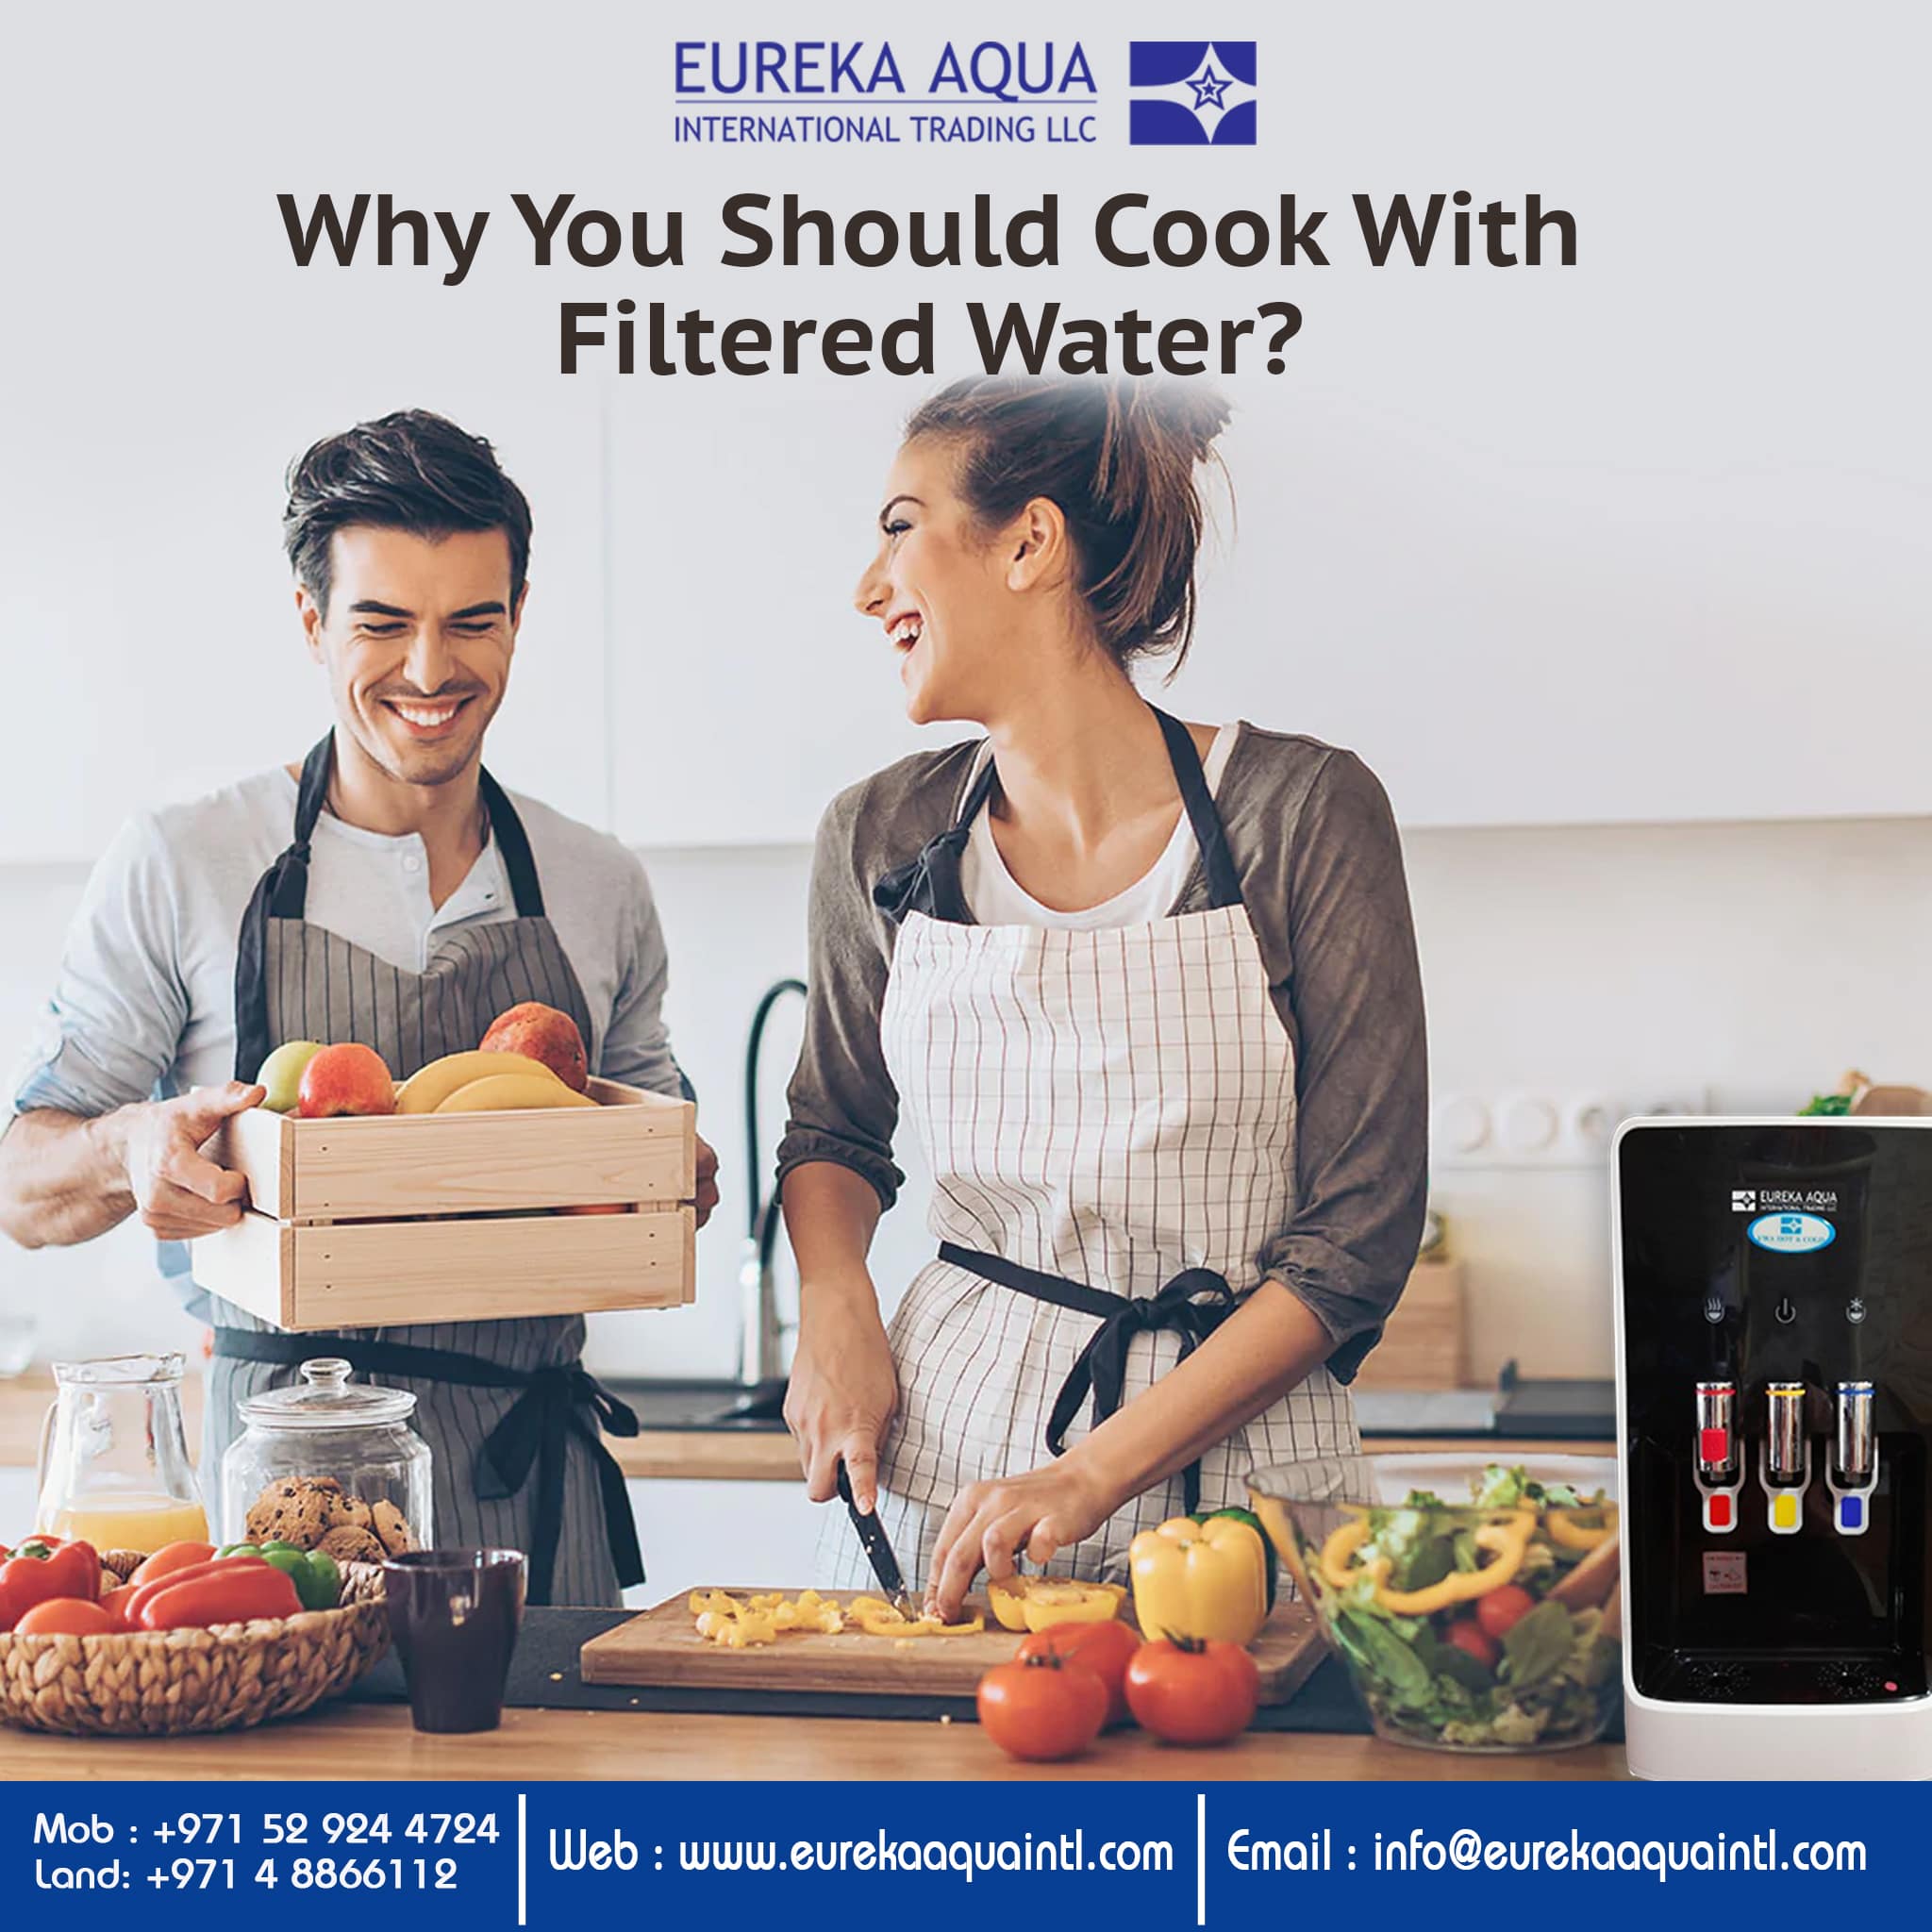 Cook with Filtered Water